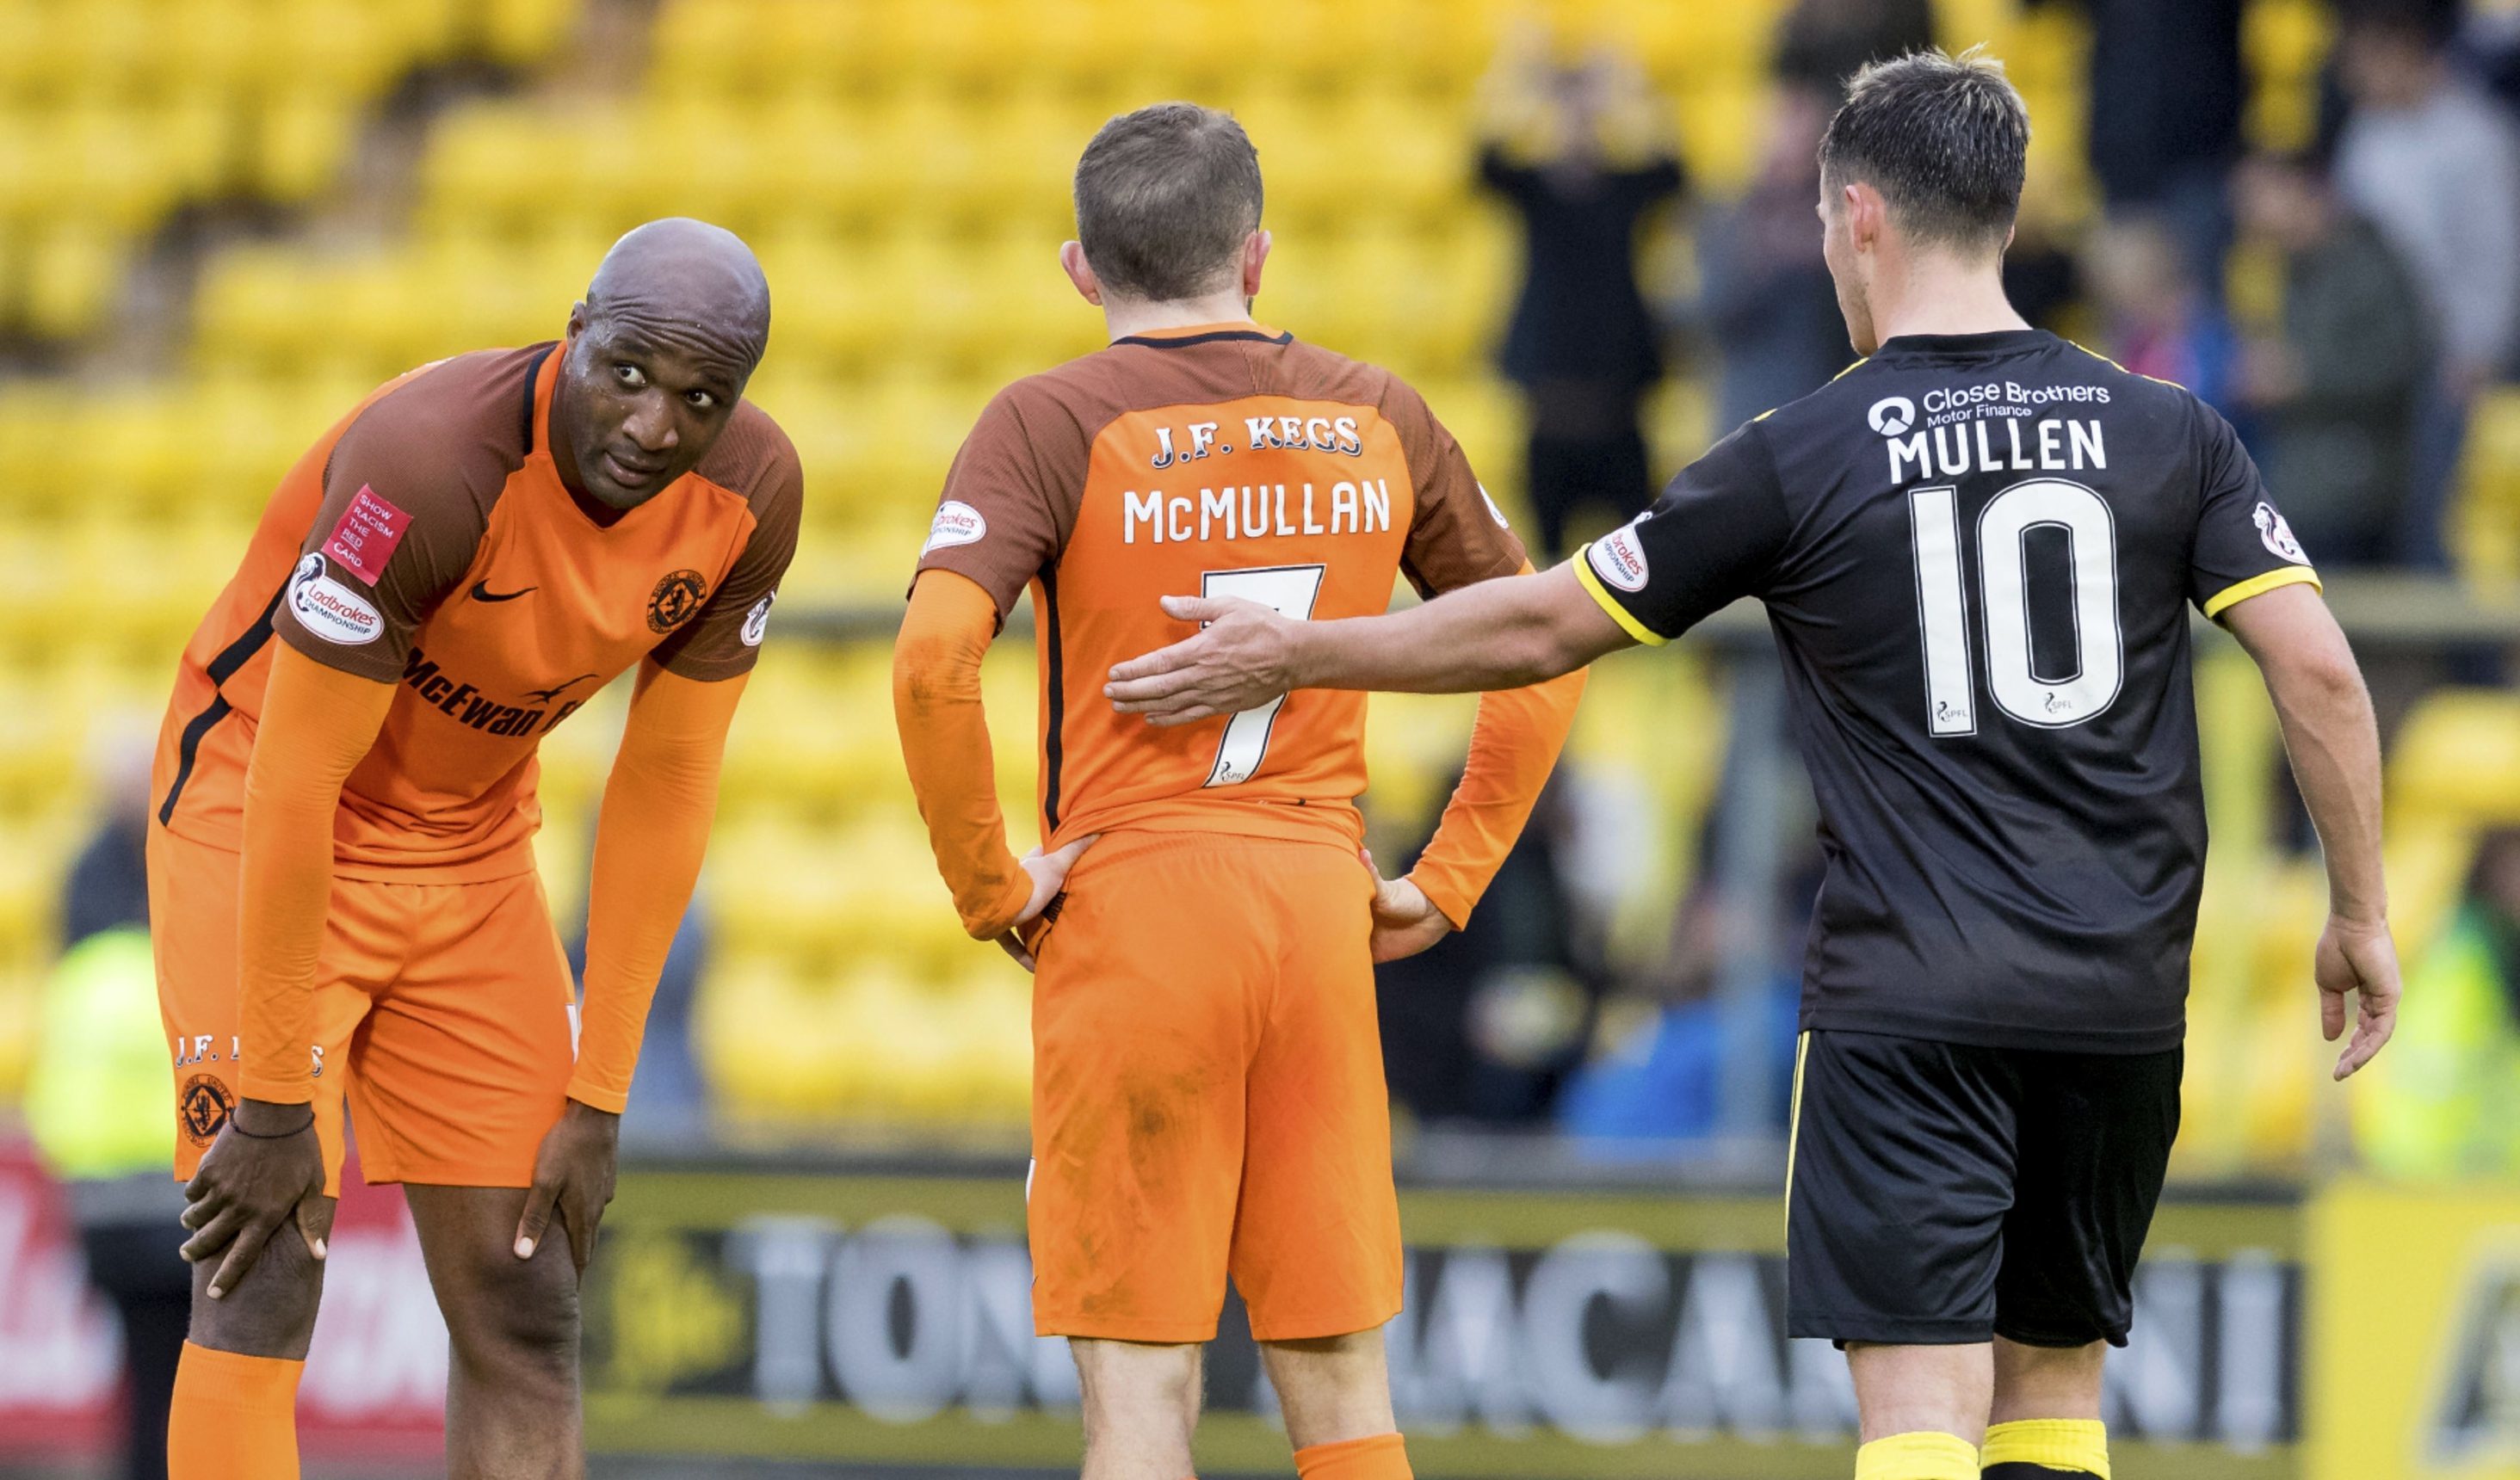 Dejection for United players William Edjenguele and Paul McMullan at full-time on Saturday.